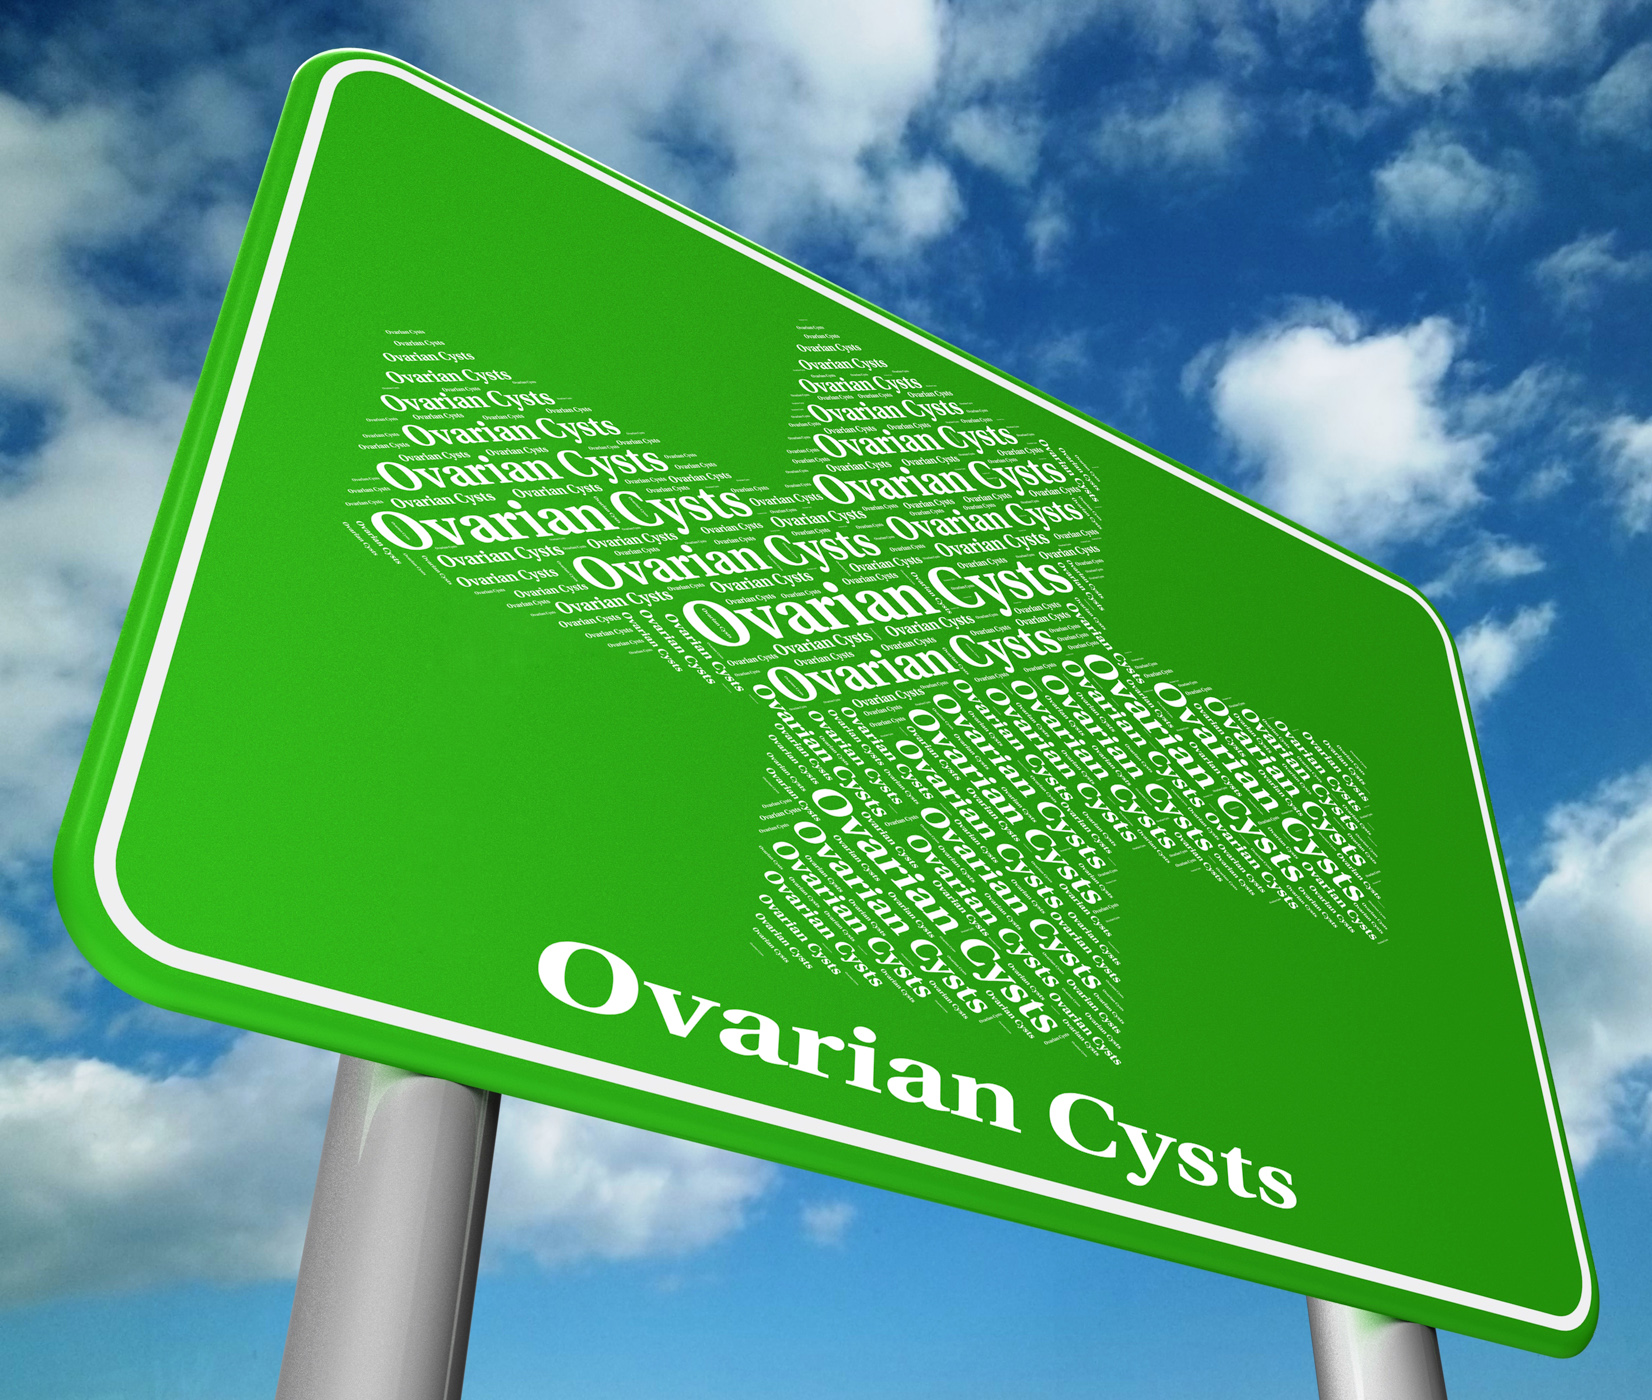 Ovarian cysts shows poor health and solanum photo